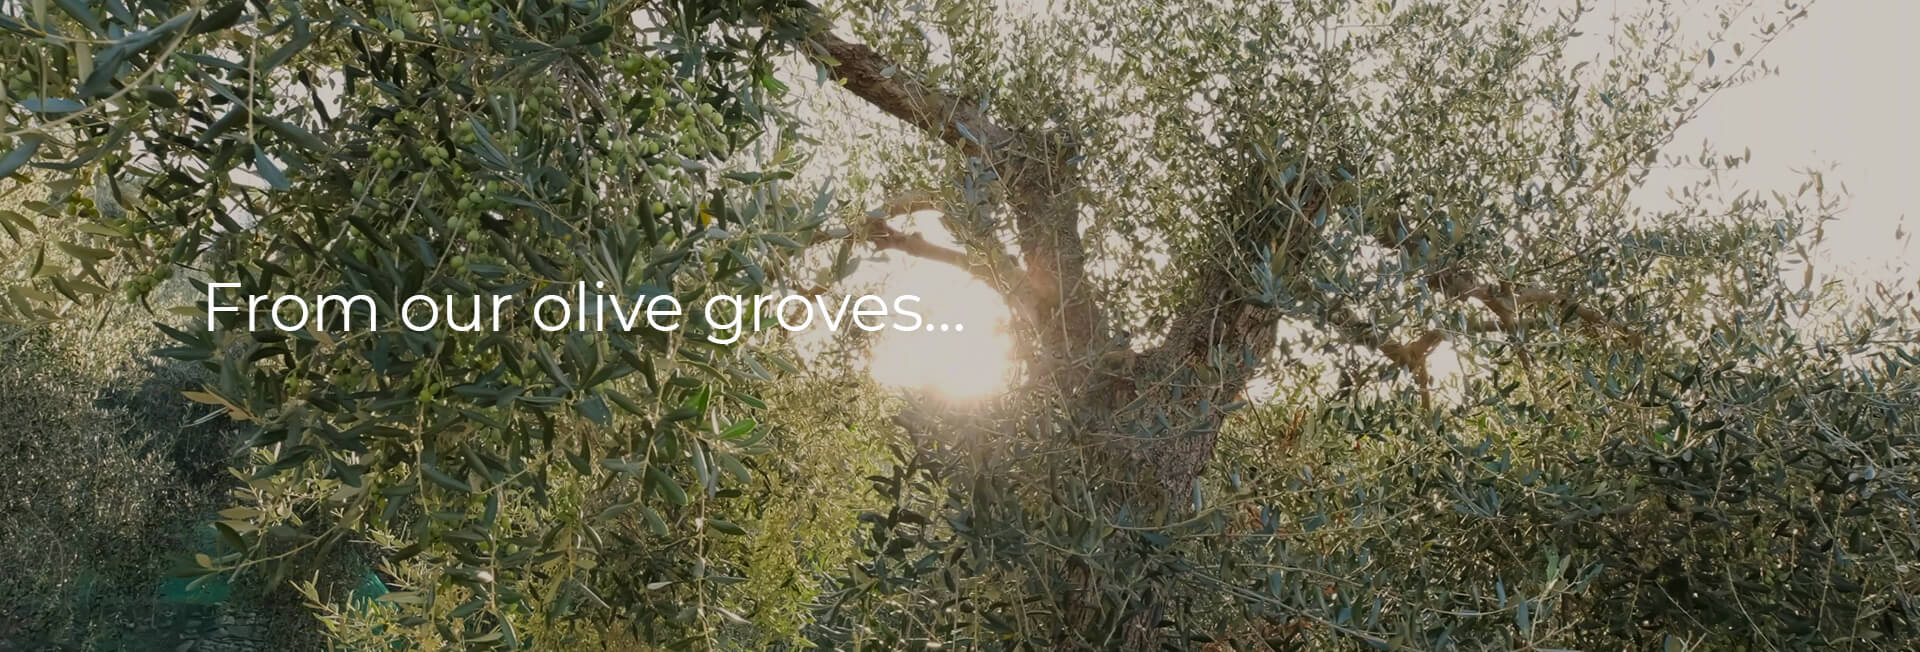 From Our Olive Groves